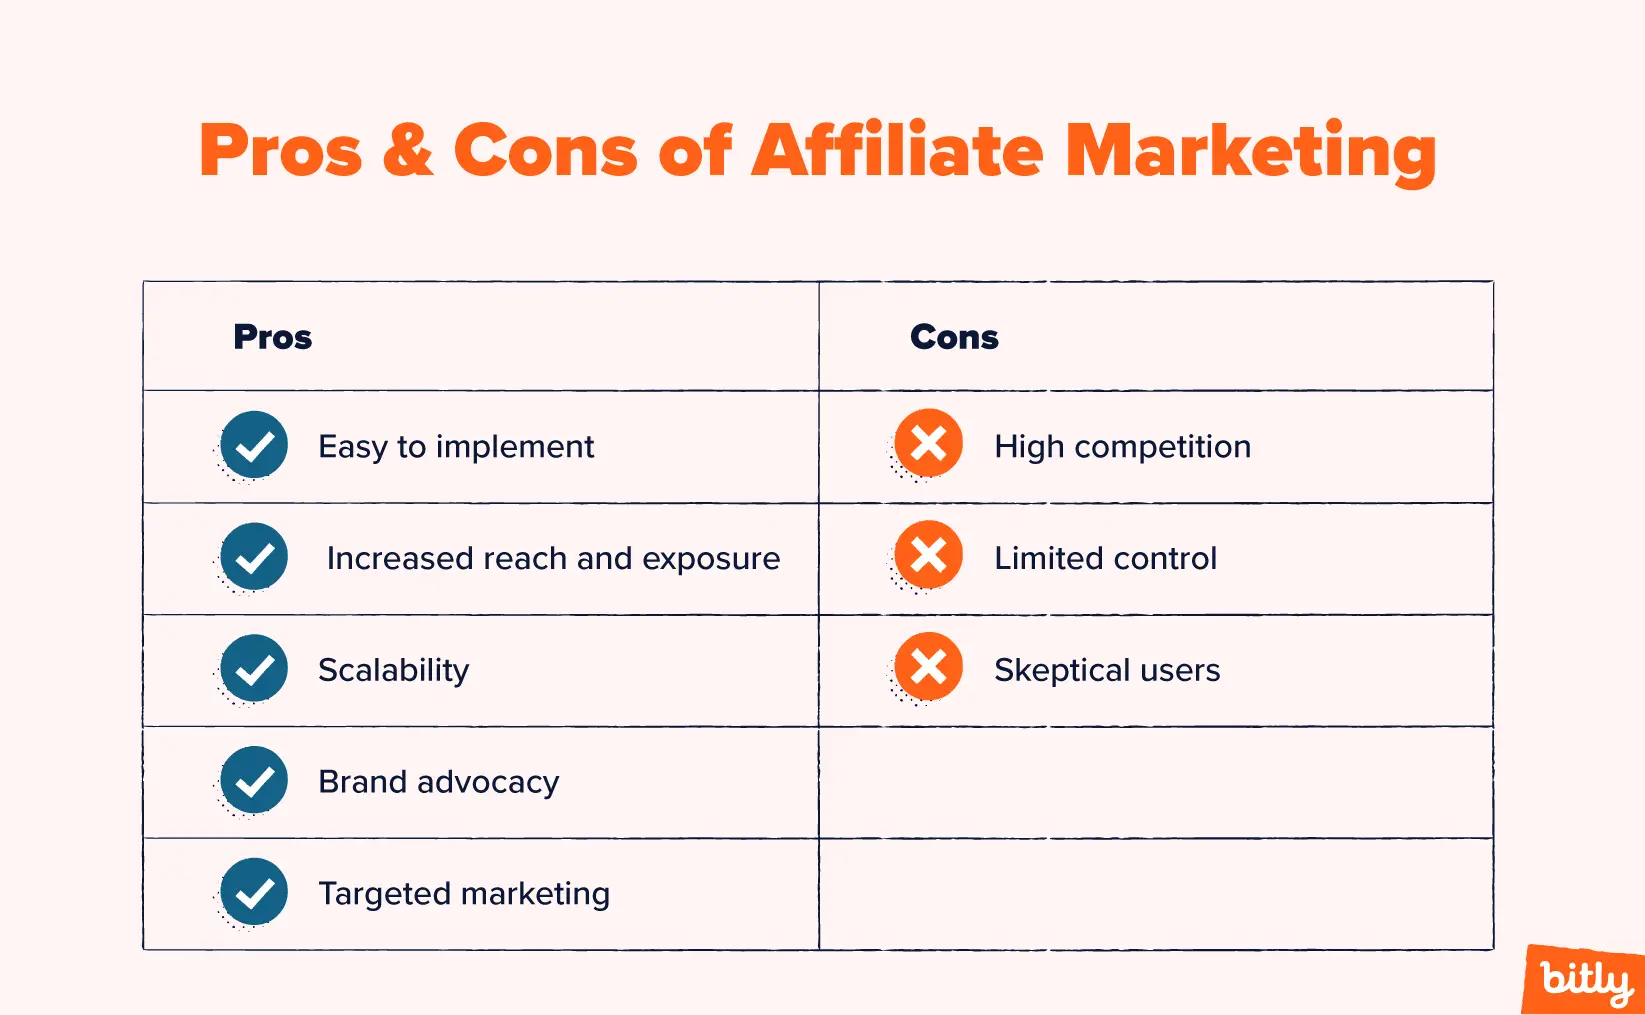 A chart showing the pros and cons of affiliate marketing.